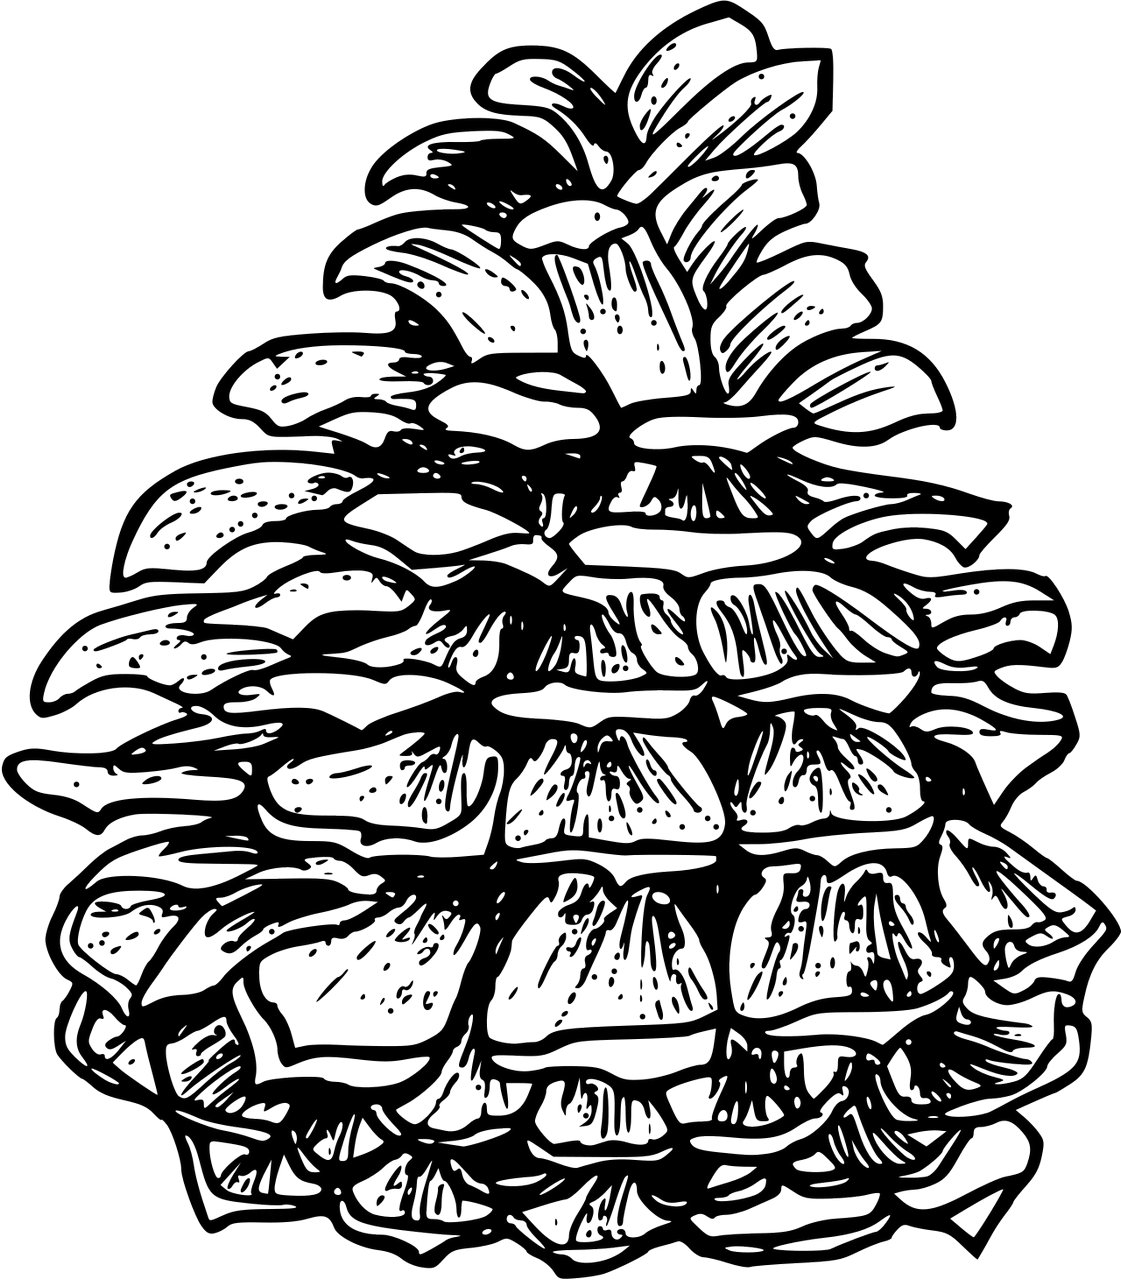 Pinecone outline